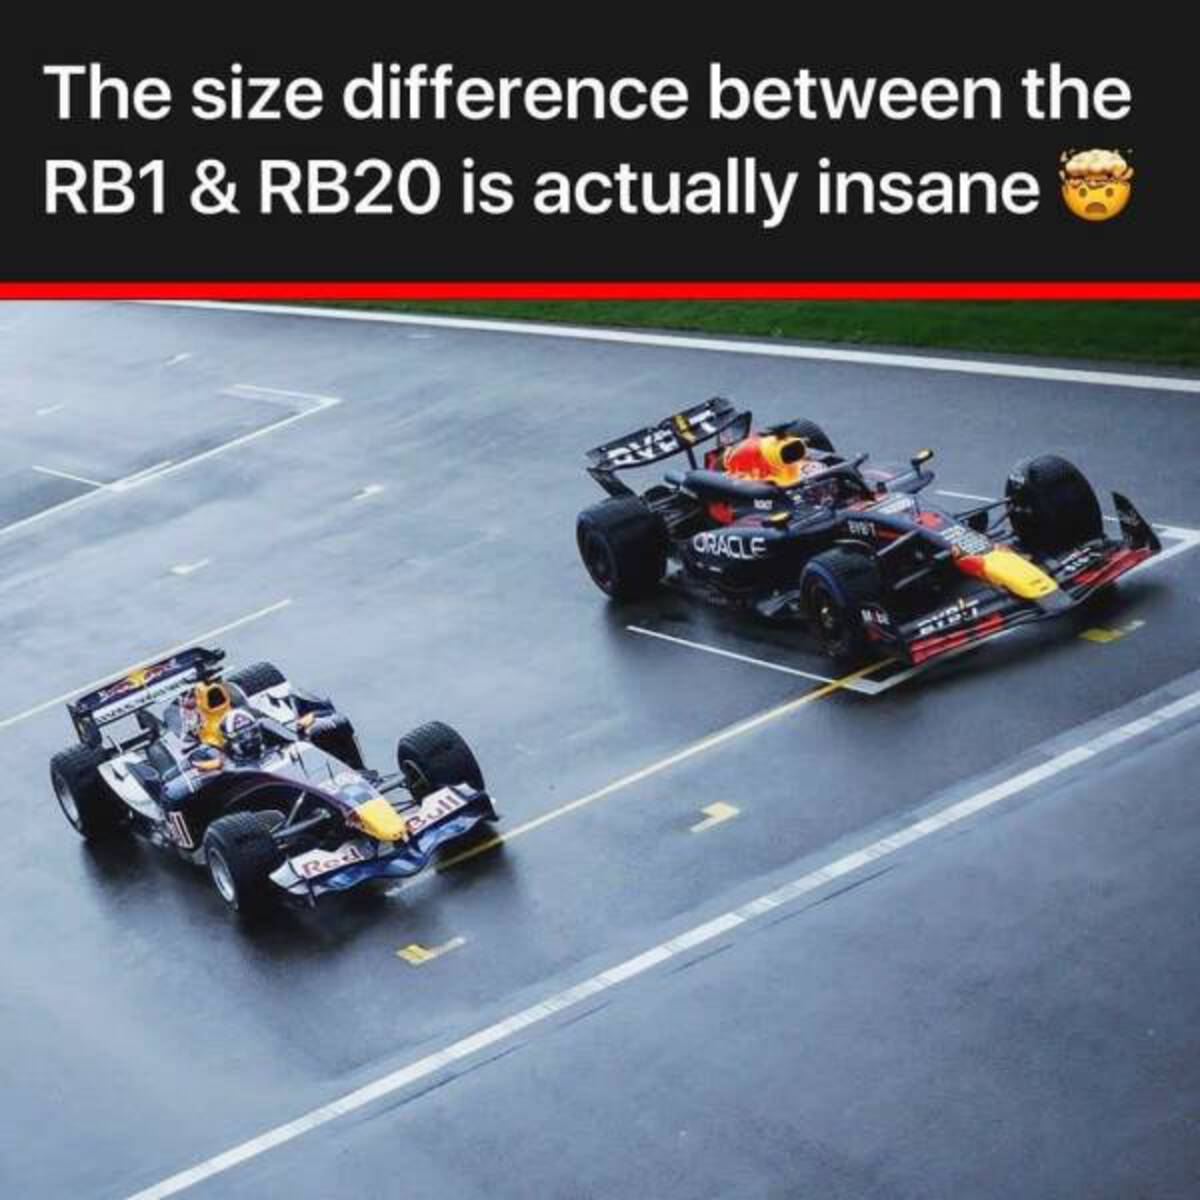 formula one car - The size difference between the RB1 & RB20 is actually insane Oracle